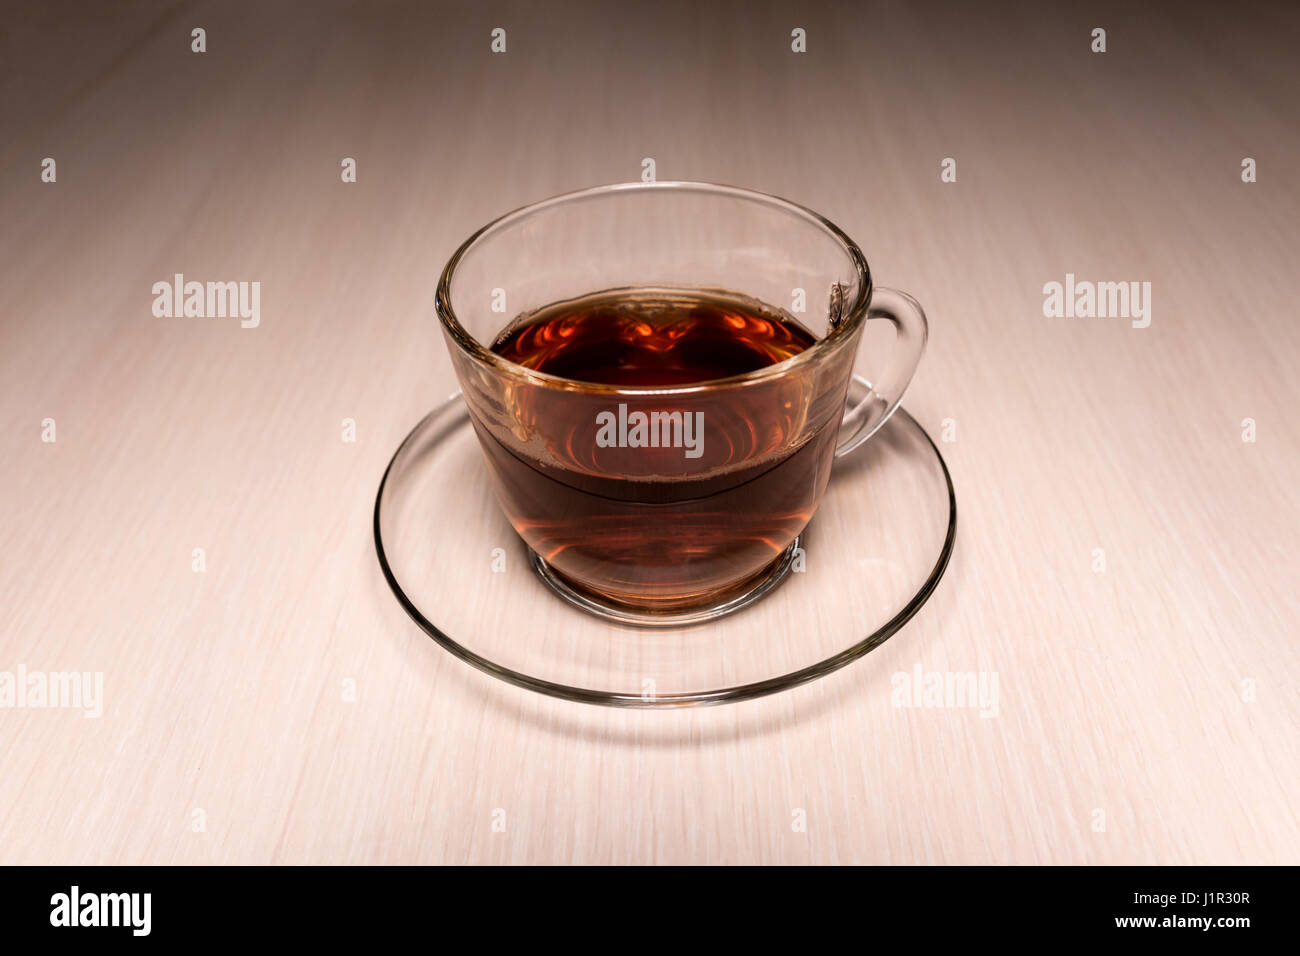 transparent glass cup with tea on a saucer placed on a table Stock Photo